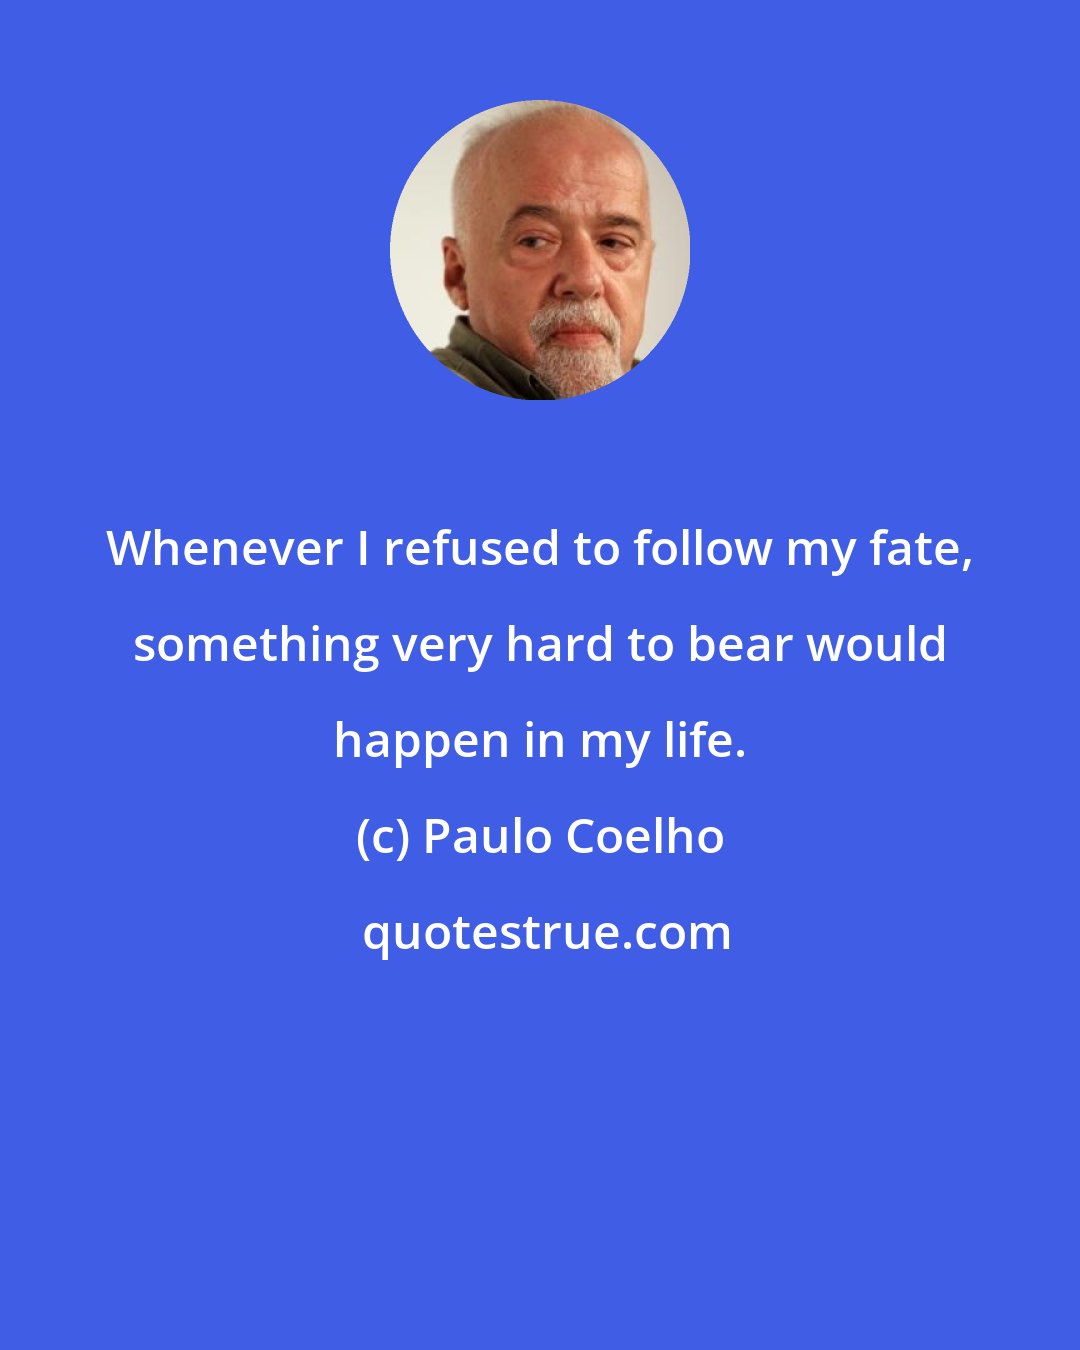 Paulo Coelho: Whenever I refused to follow my fate, something very hard to bear would happen in my life.